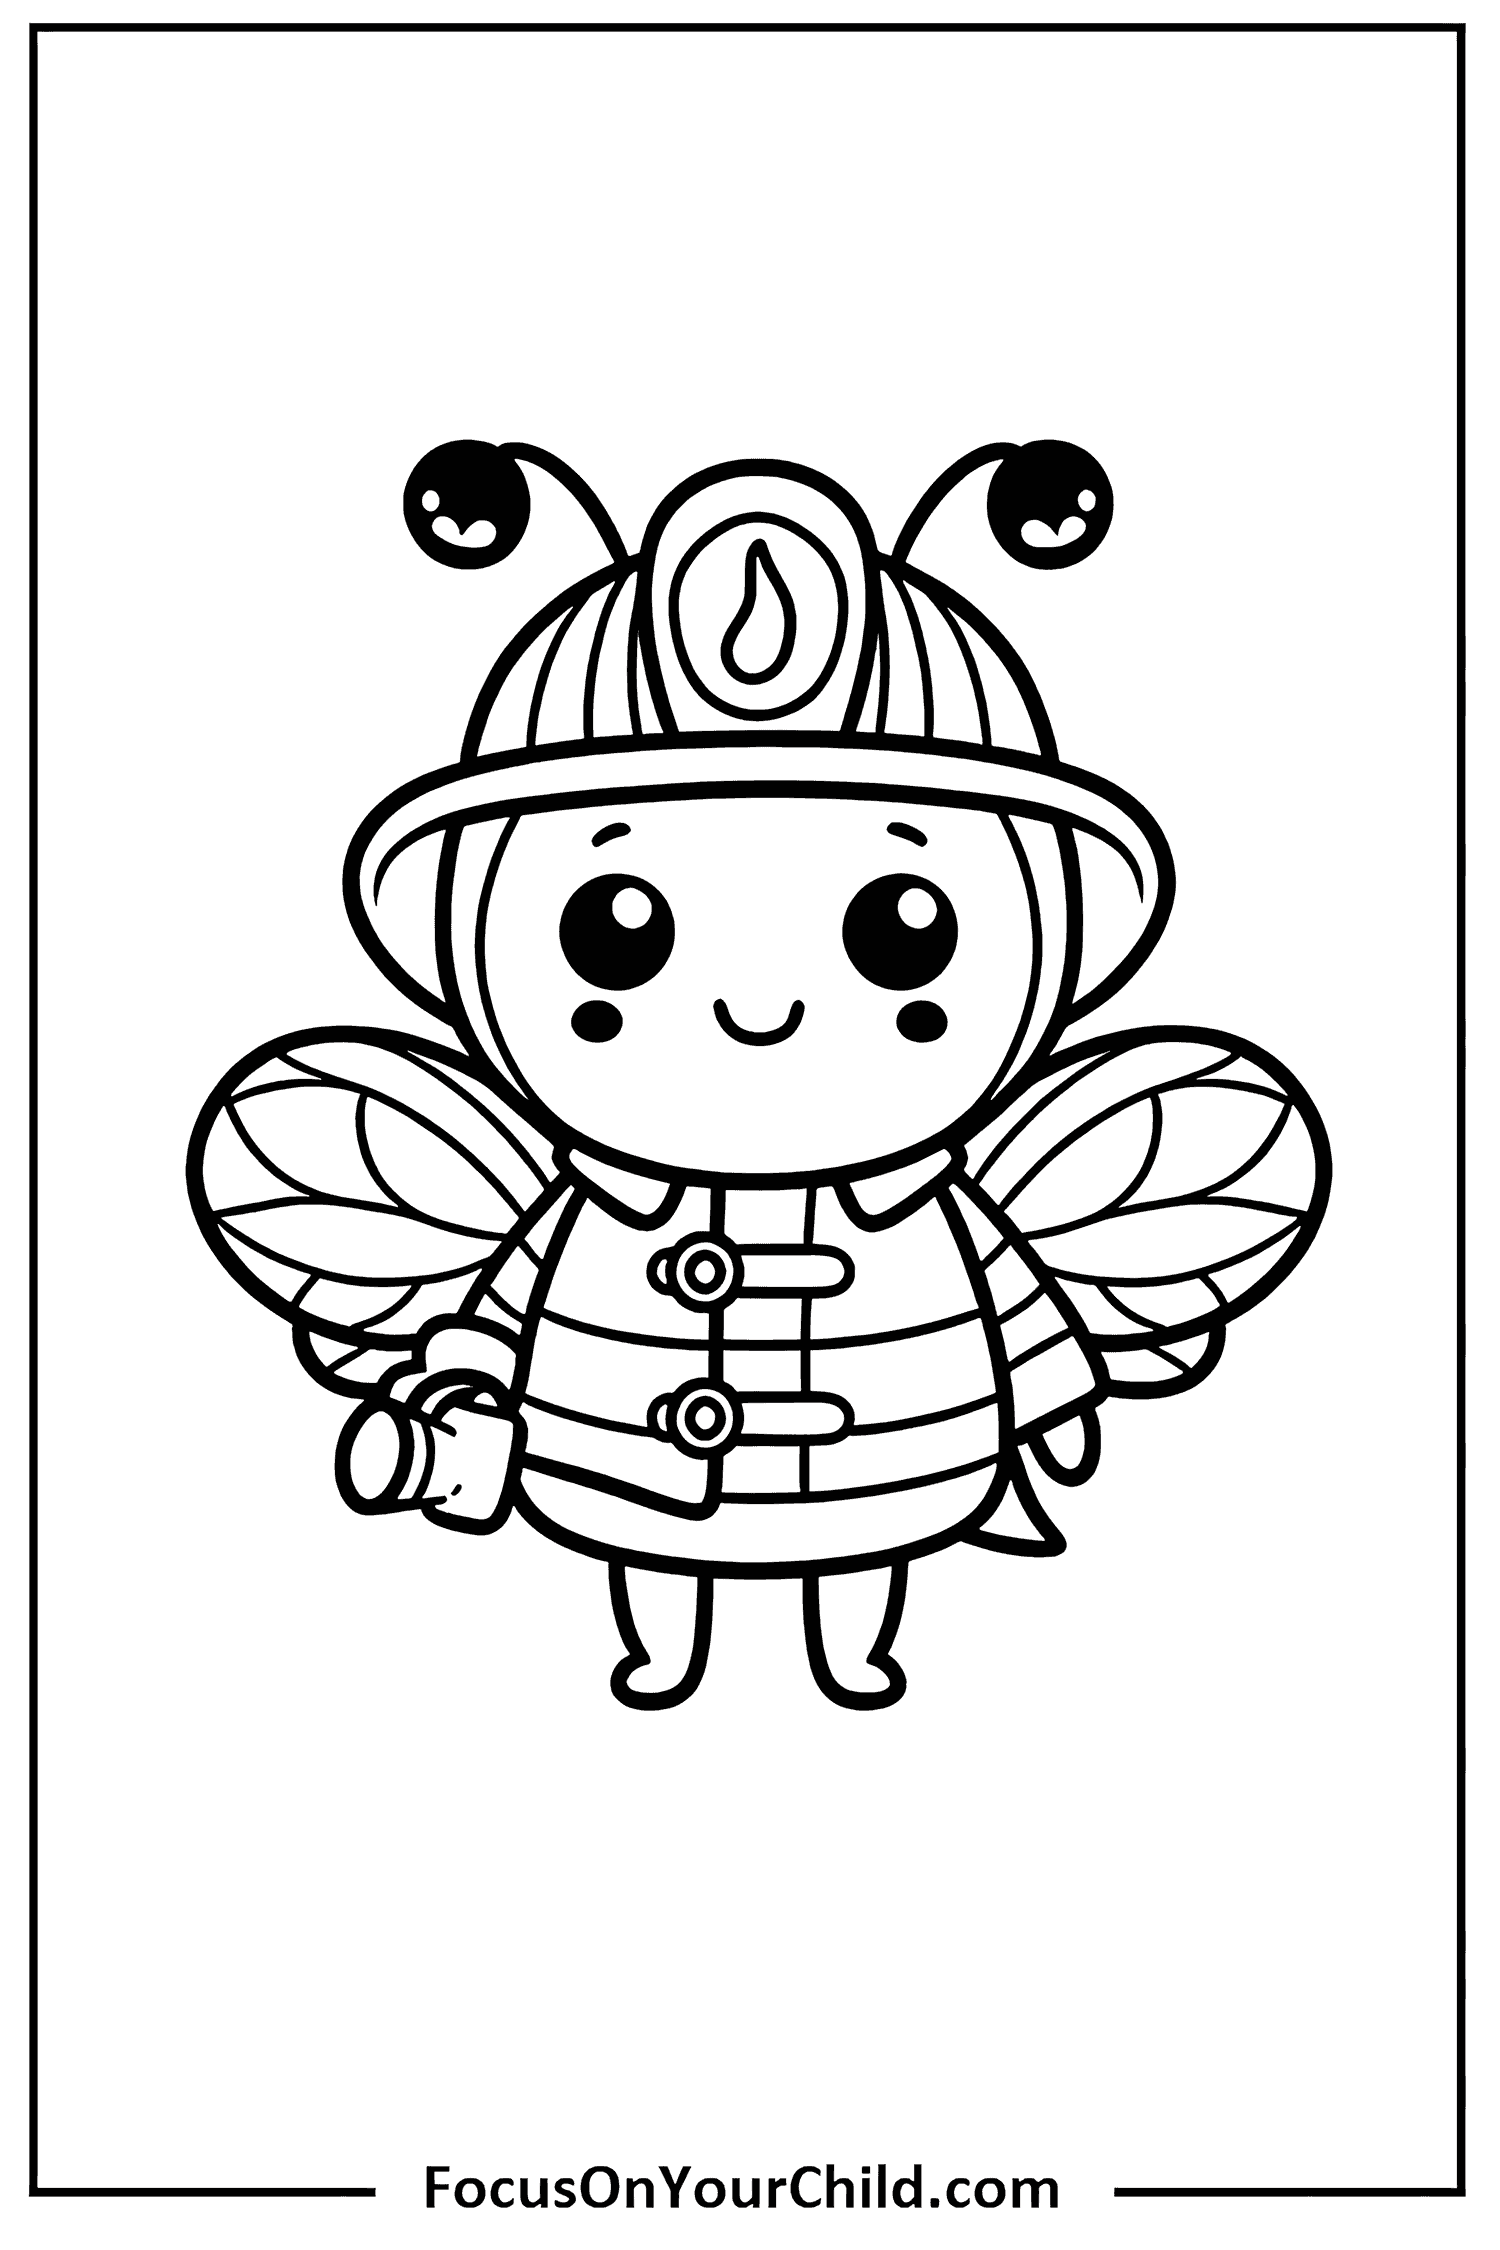 An adorable bee firefighter holding a honey pot against a white background.